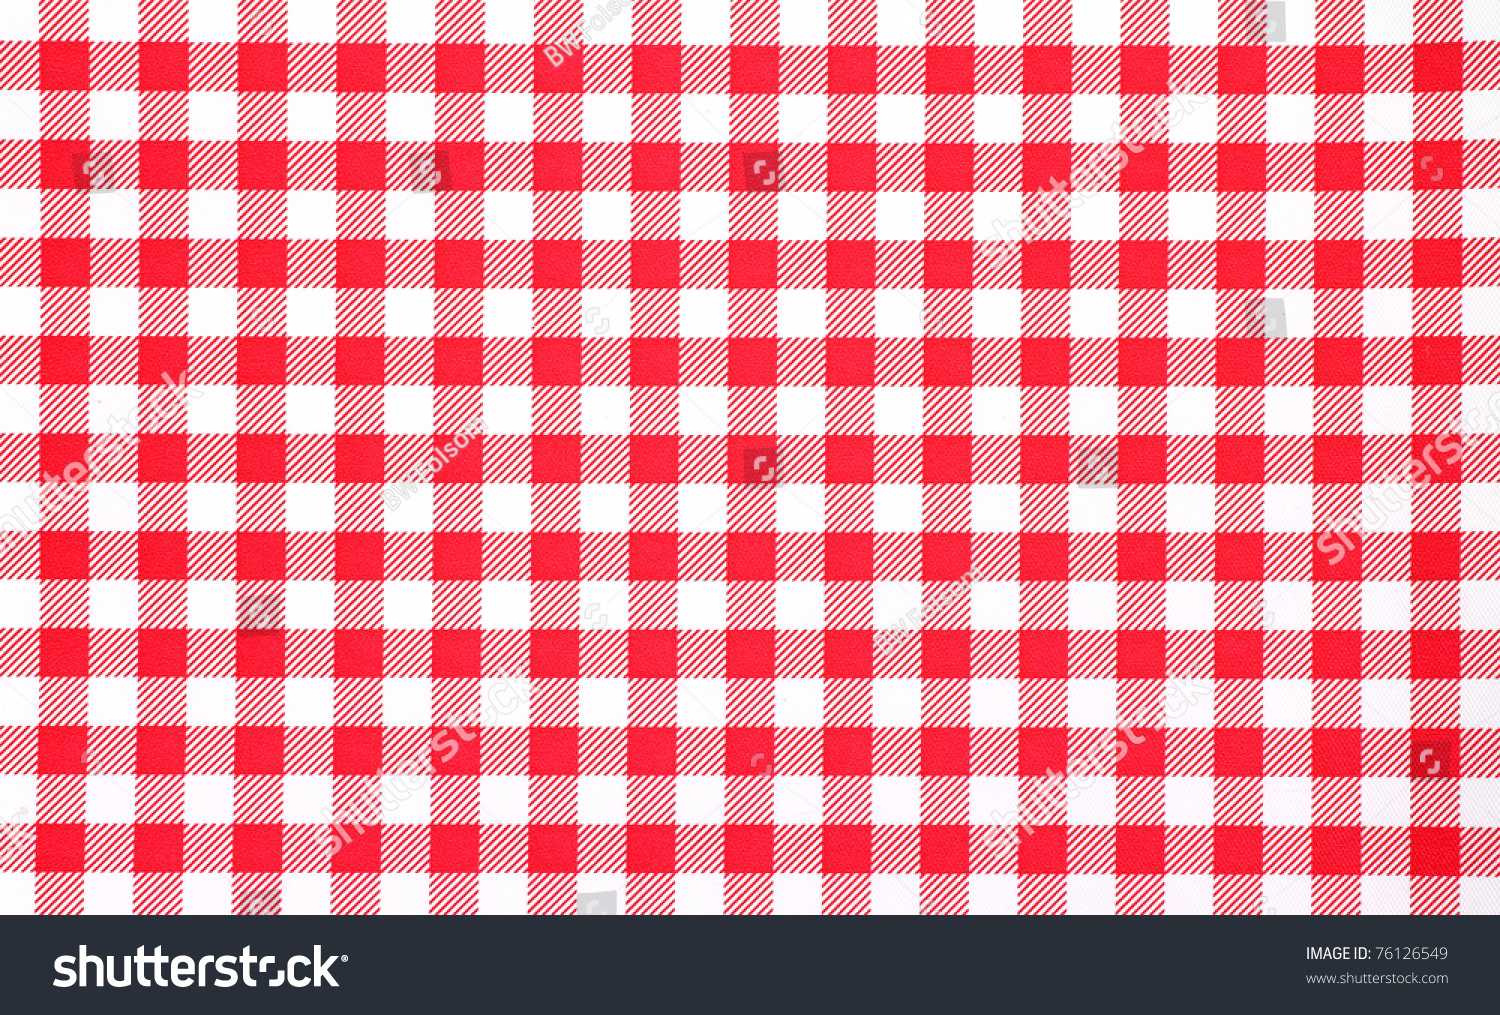 A very close view of a red and white checkerboard tablecloth. #76126549